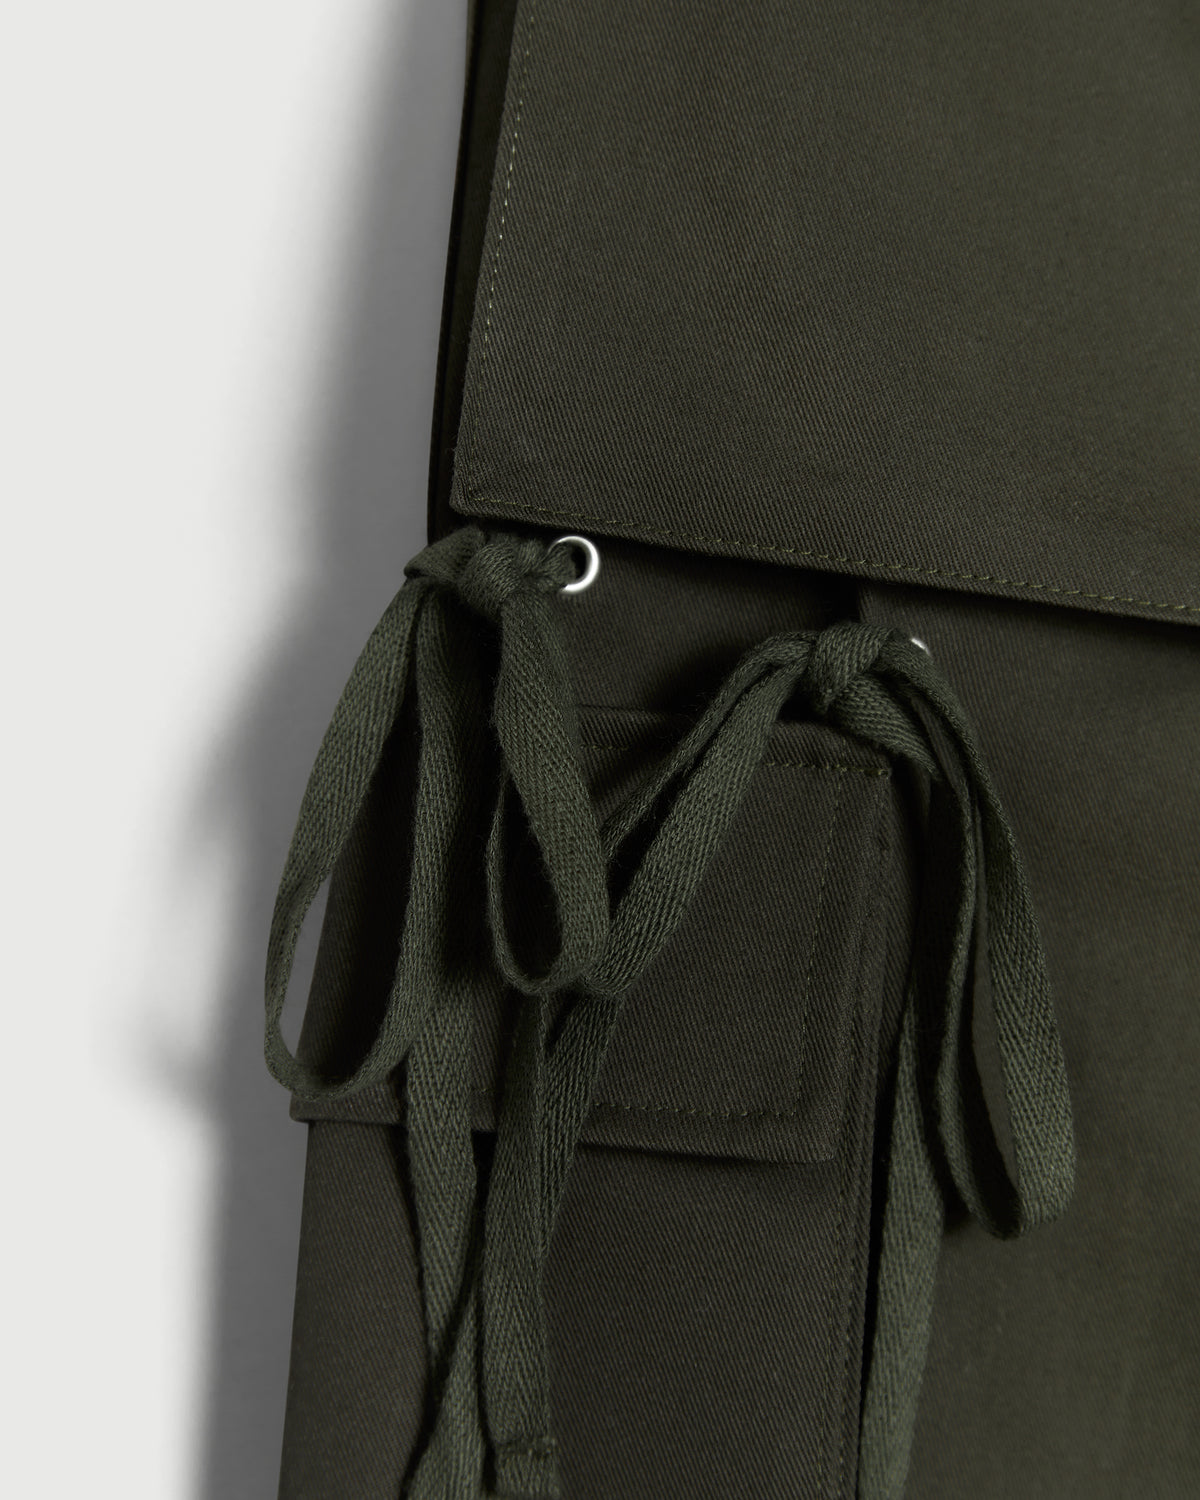 Modular Pocket Cotton Twill Cargo Pant in Olive